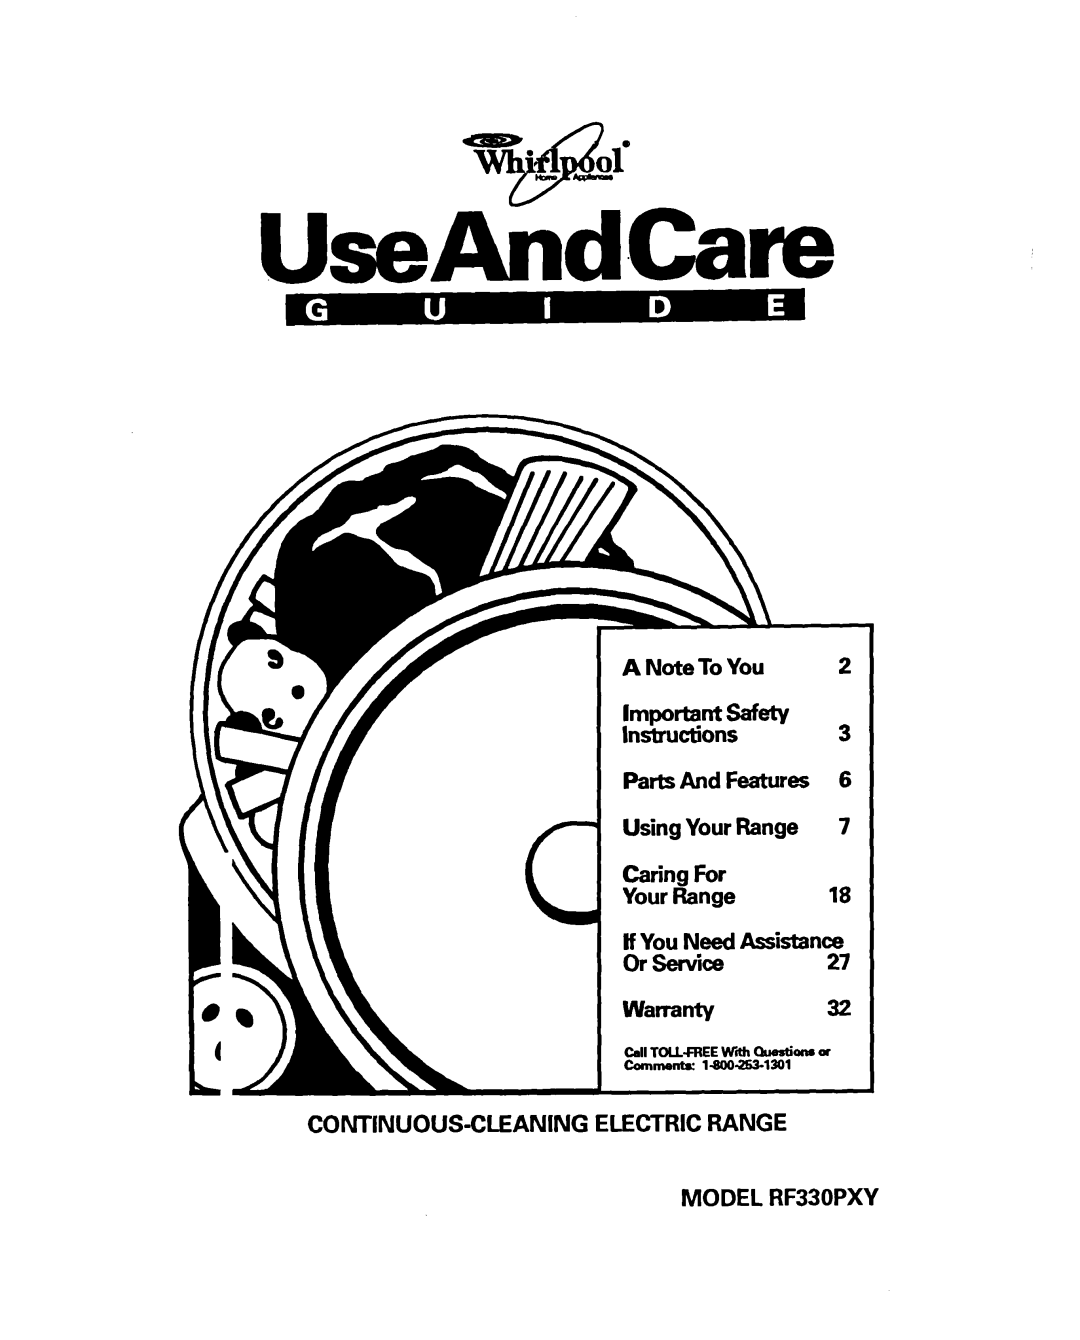 Whirlpool RF330PXY manual ImpwtantSafety instructions3 PartsAnd Features 